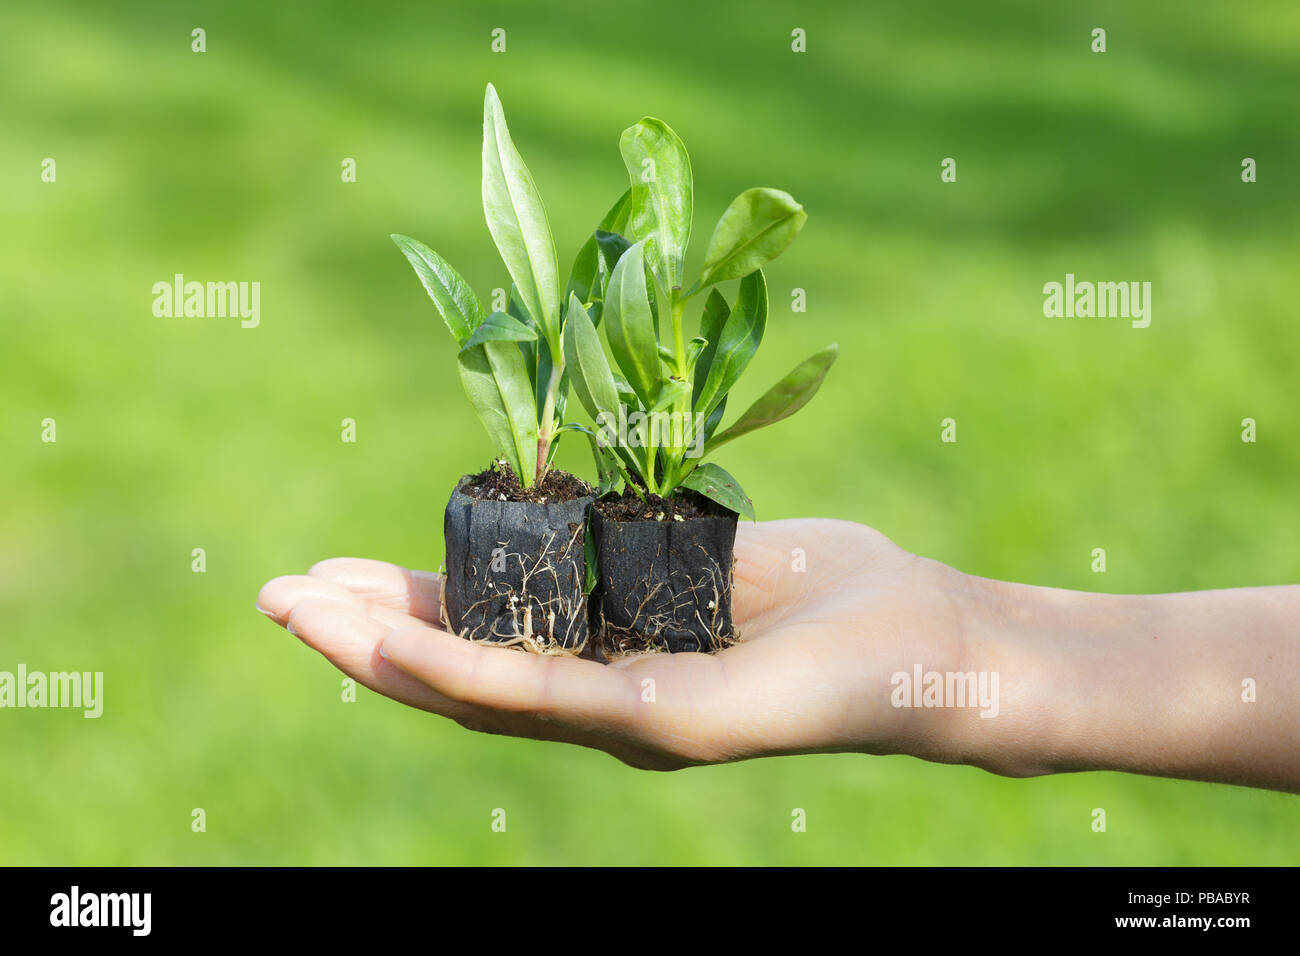 A woman gardener holds plug plants in the palm of her hand. Green garden appears in the background Stock Photo